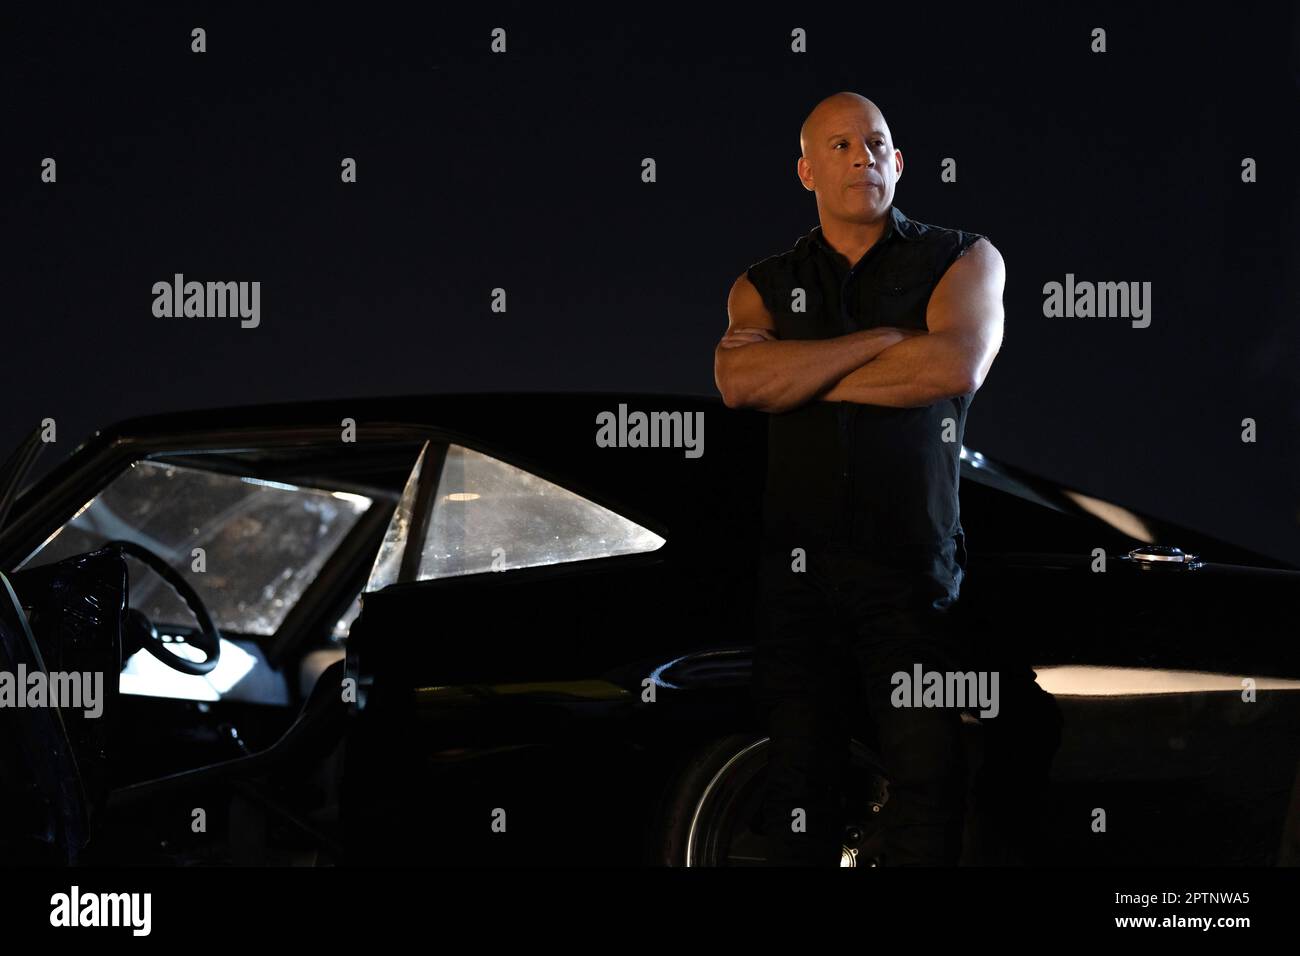 Fast X Vin Diesel as Dominic Toretto Stock Photo - Alamy